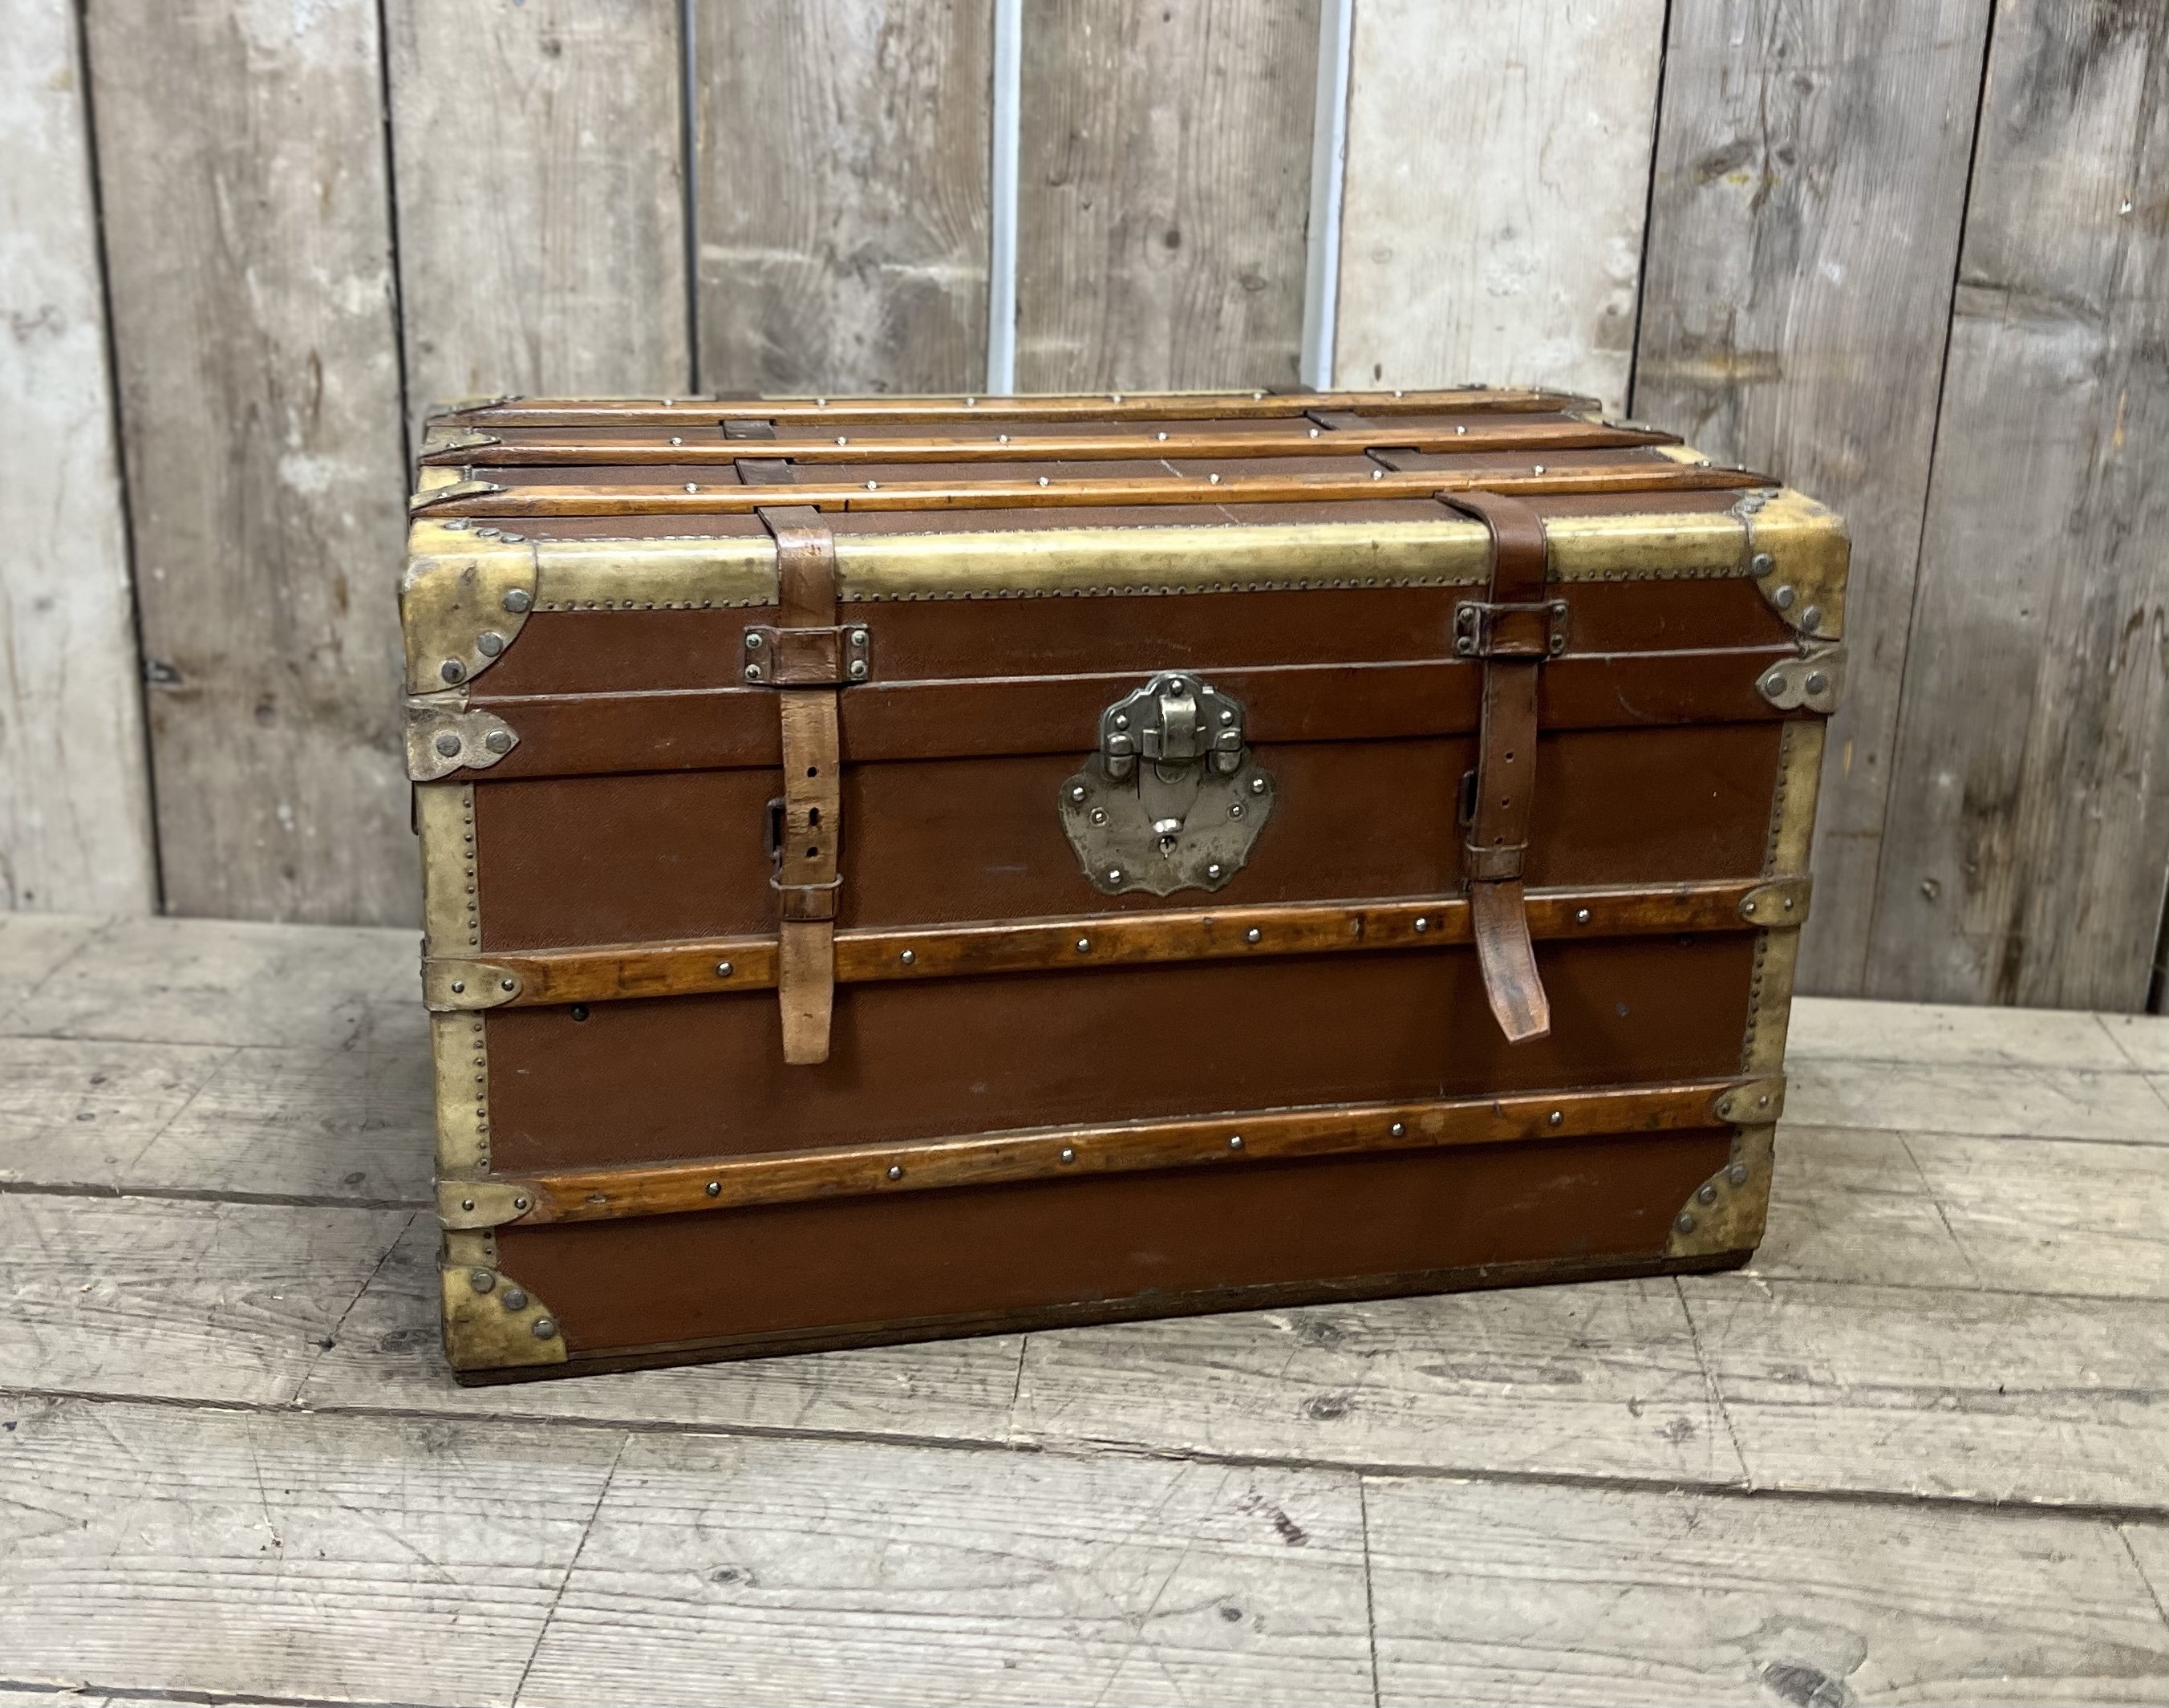 Antique Steamer Trunk Wardrobe Trunk With Drawers Luggage Shipping Suitcase  Rare